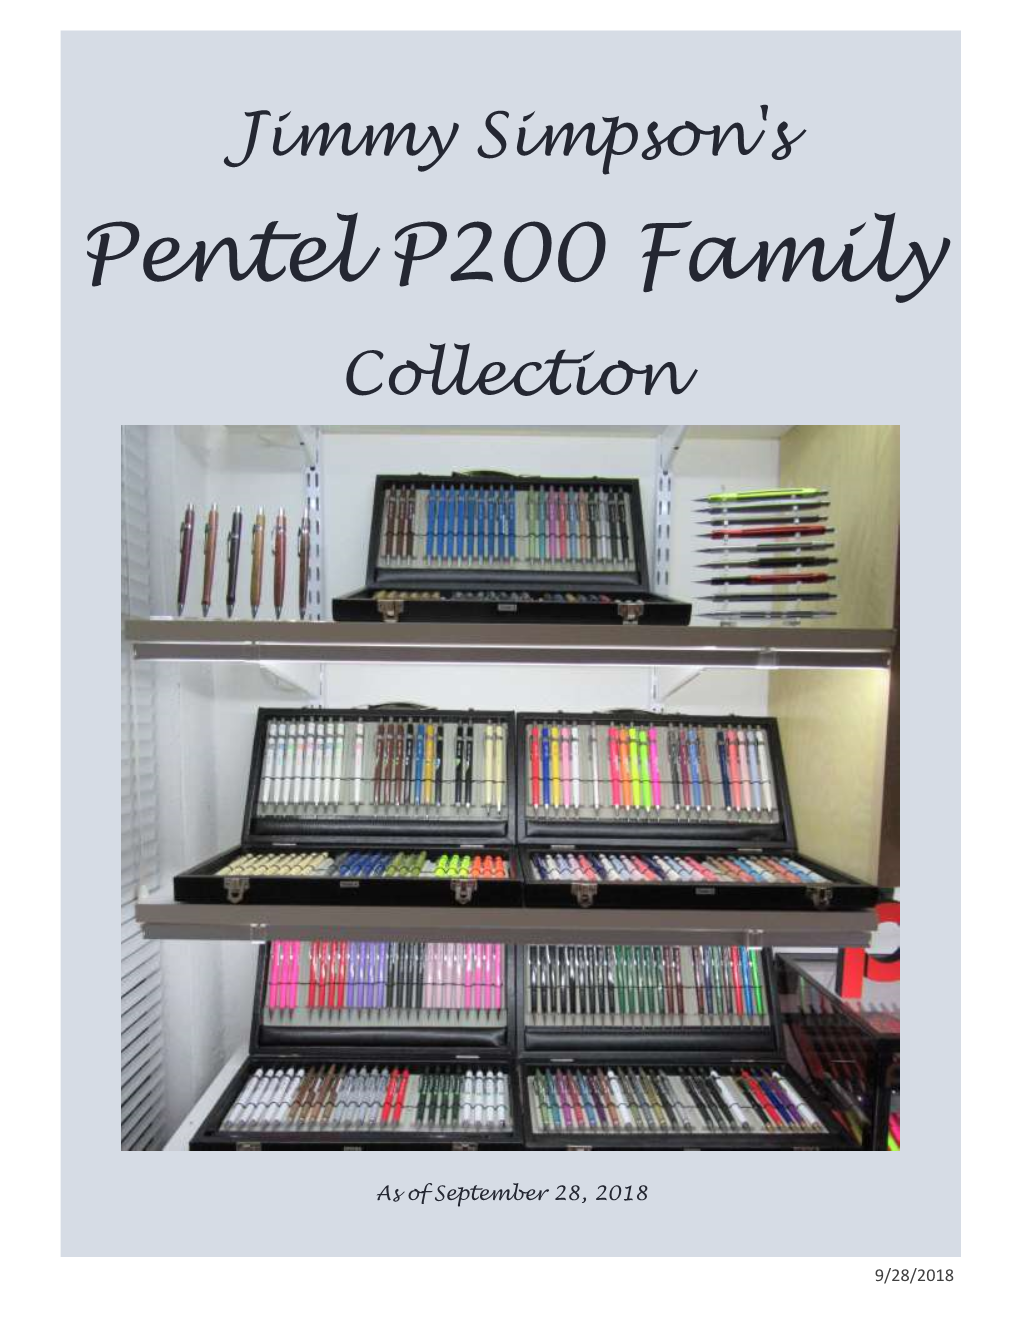 Pentel P200 Family Collection